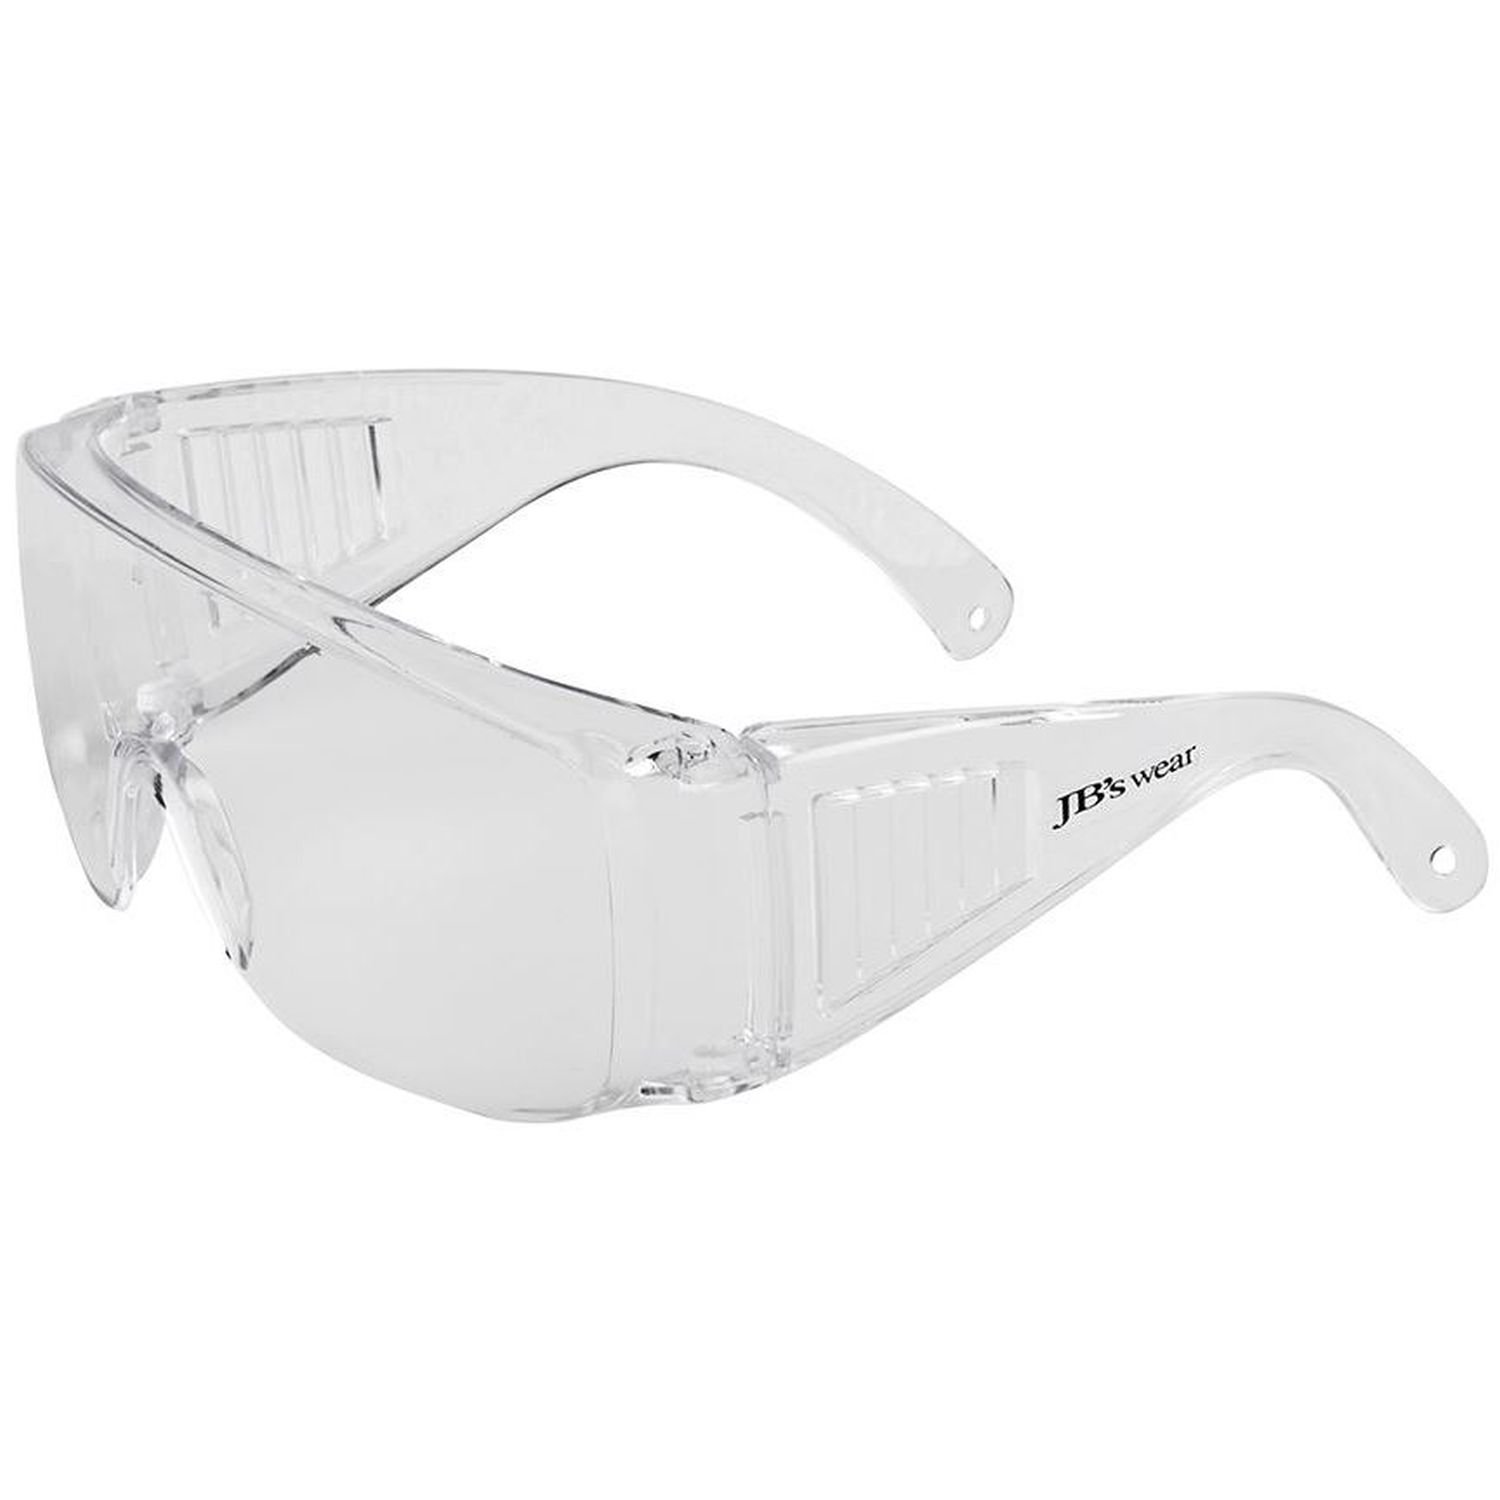 Visitor Anti Scratch Clear Safety/Overglasses Pkt 12